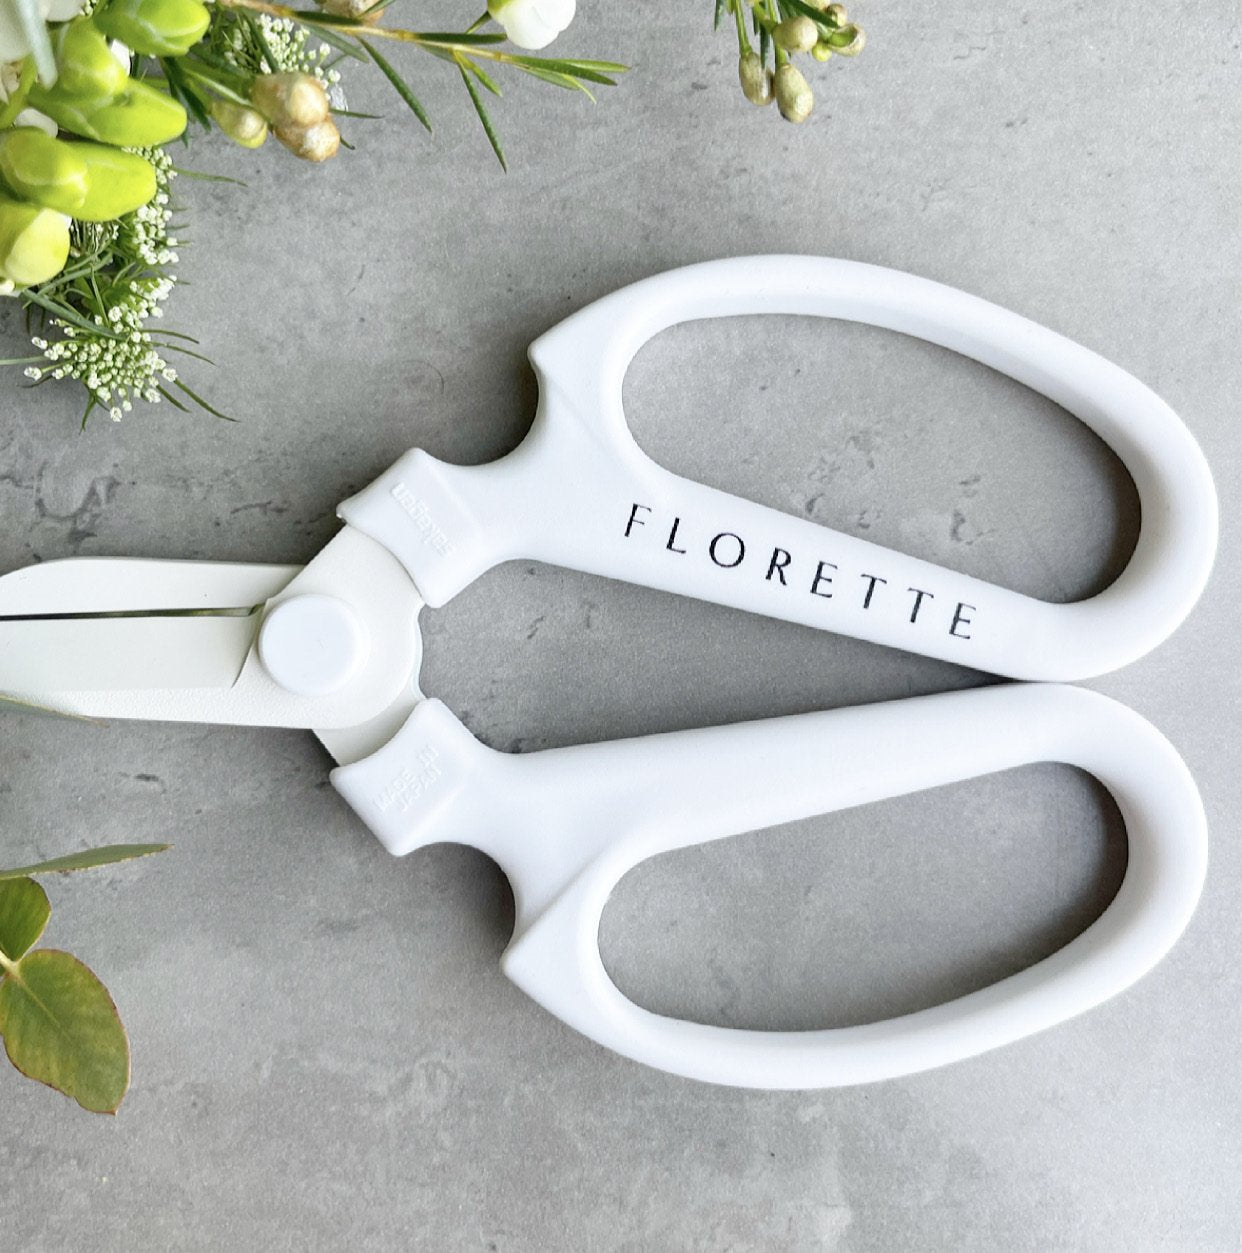 Florette White Floristry Scissors - with Teflon coated carbon steel blades, and thermoplastic handles.